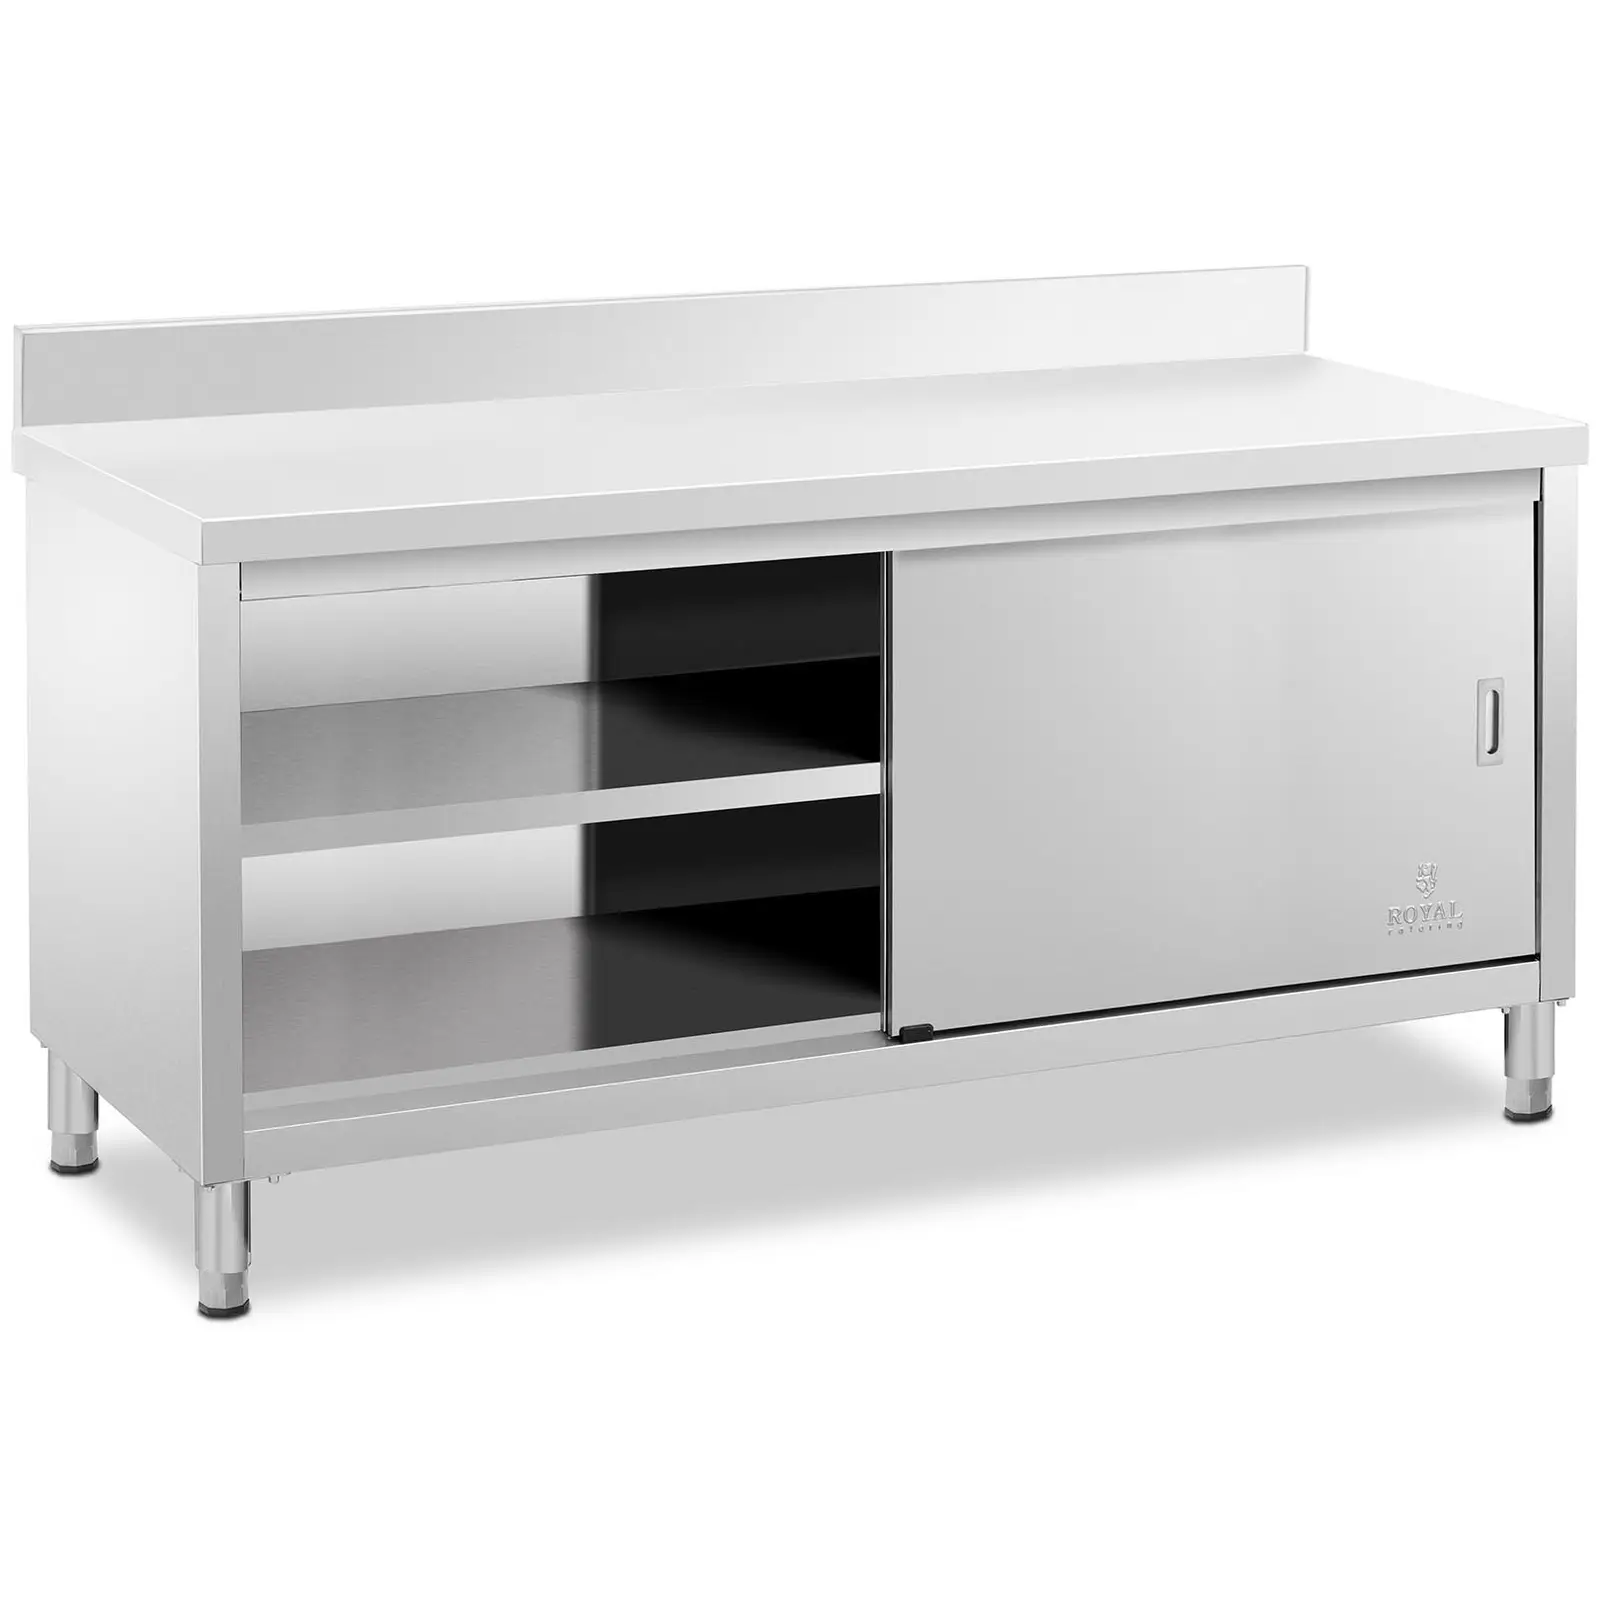 Work Cabinet - upstand - 180 x 60 cm - 600 kg load capacity